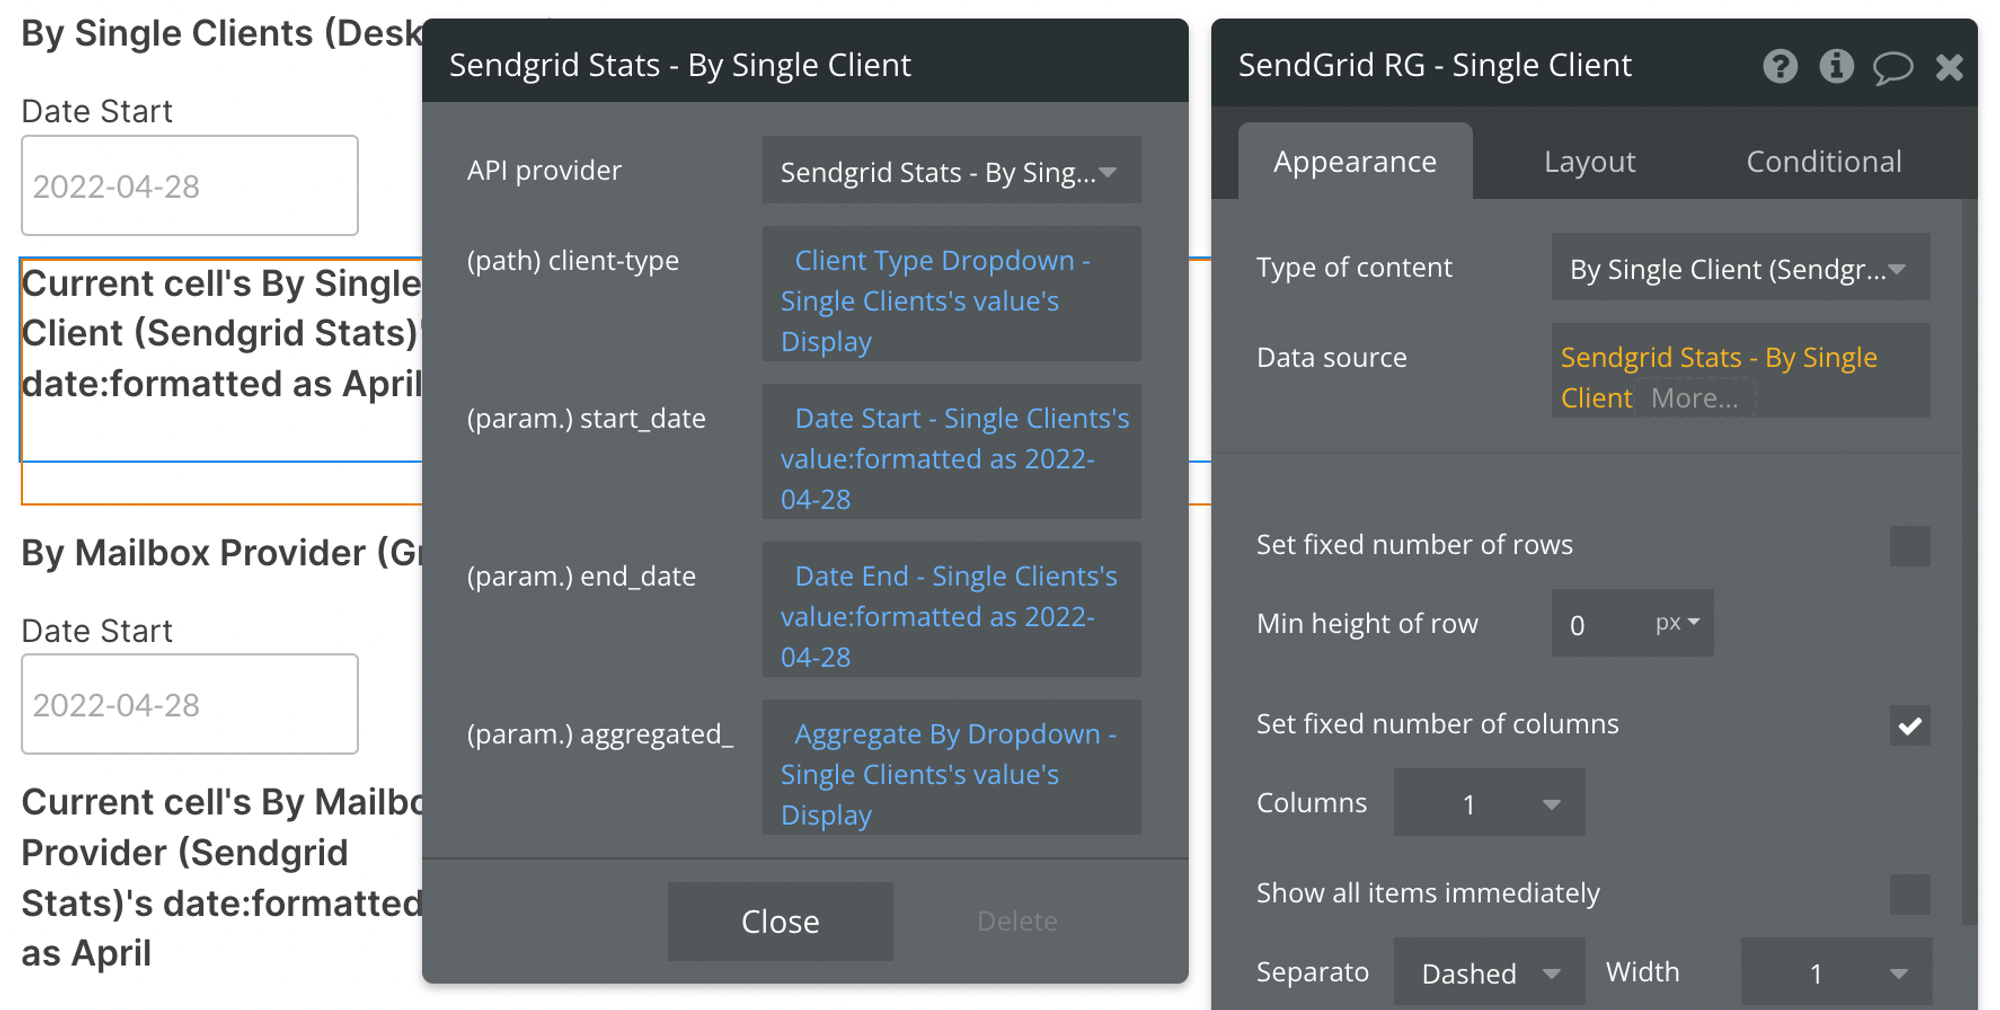 Select Sendgrid Stats - By Single Client from the API provider dropdown